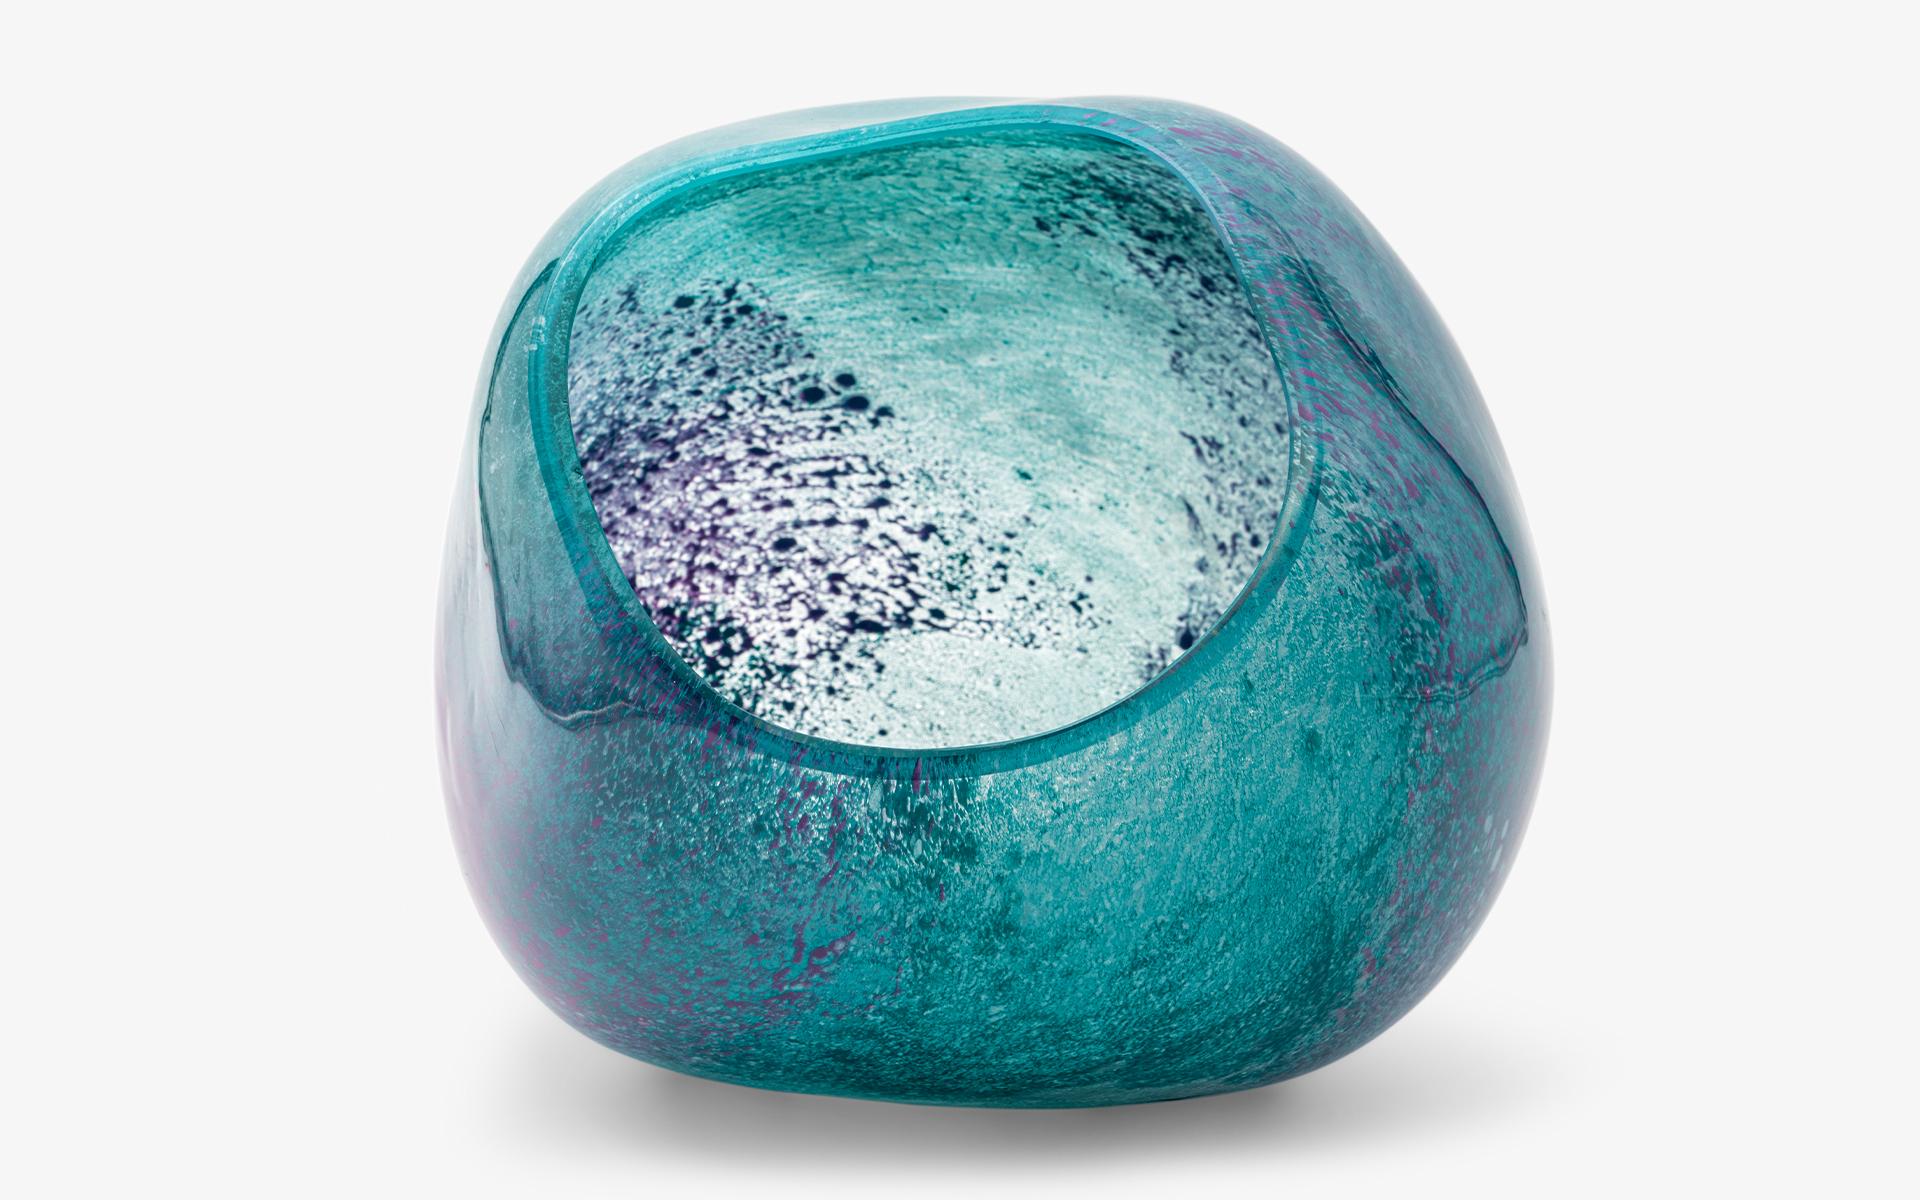 Turkish Turquoise and Lilac Color Amorphous Blown Glass Vase No:1